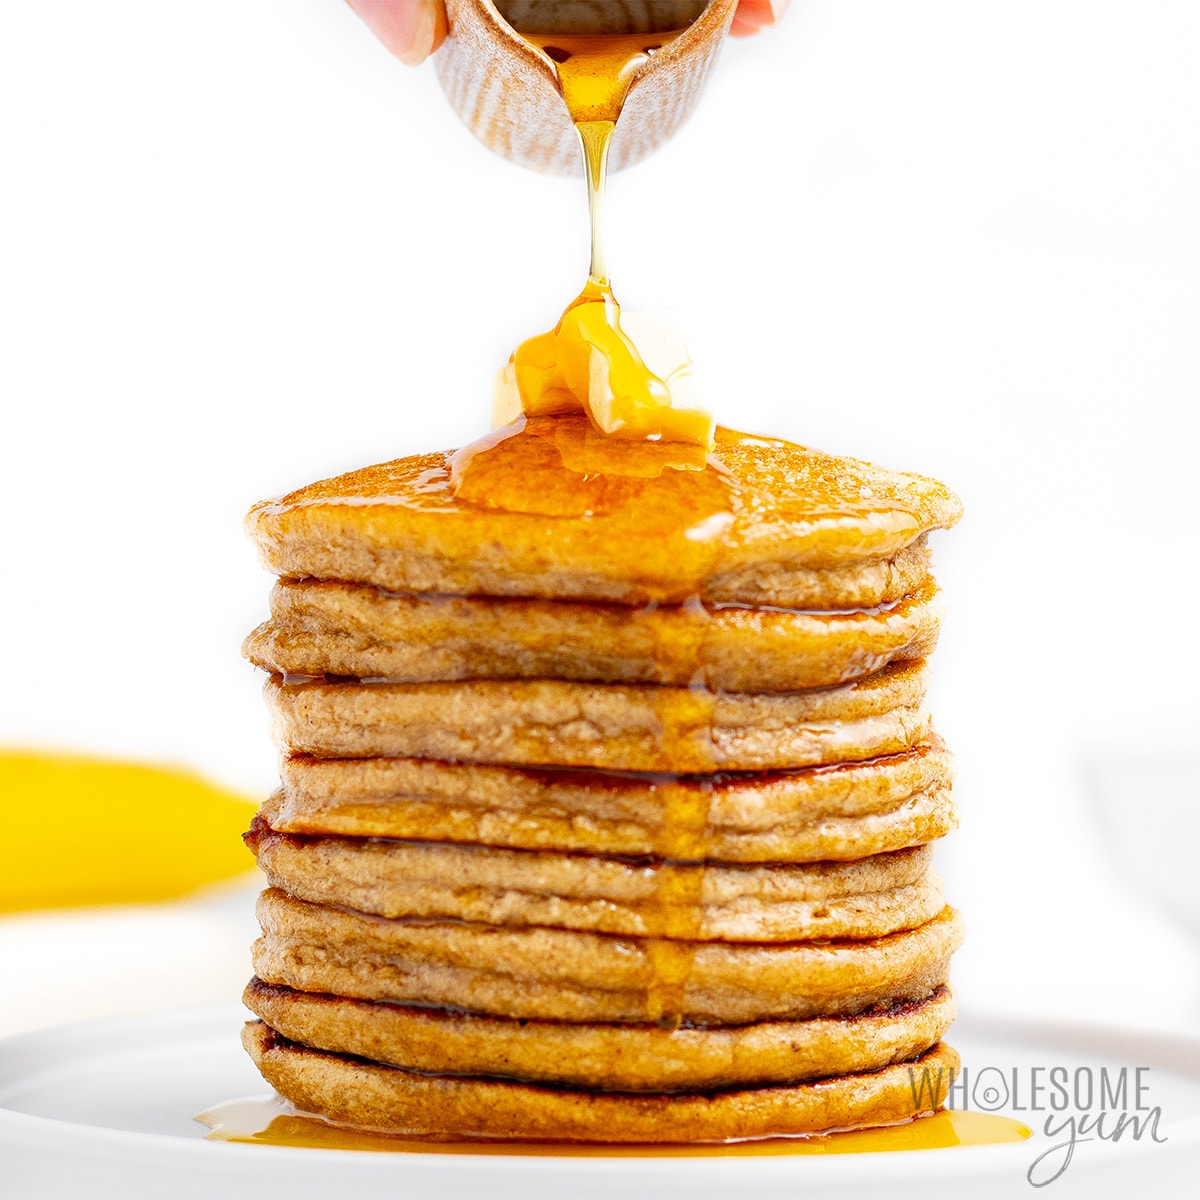 Banana oat pancakes stack with maple syrup being drizzled over it.